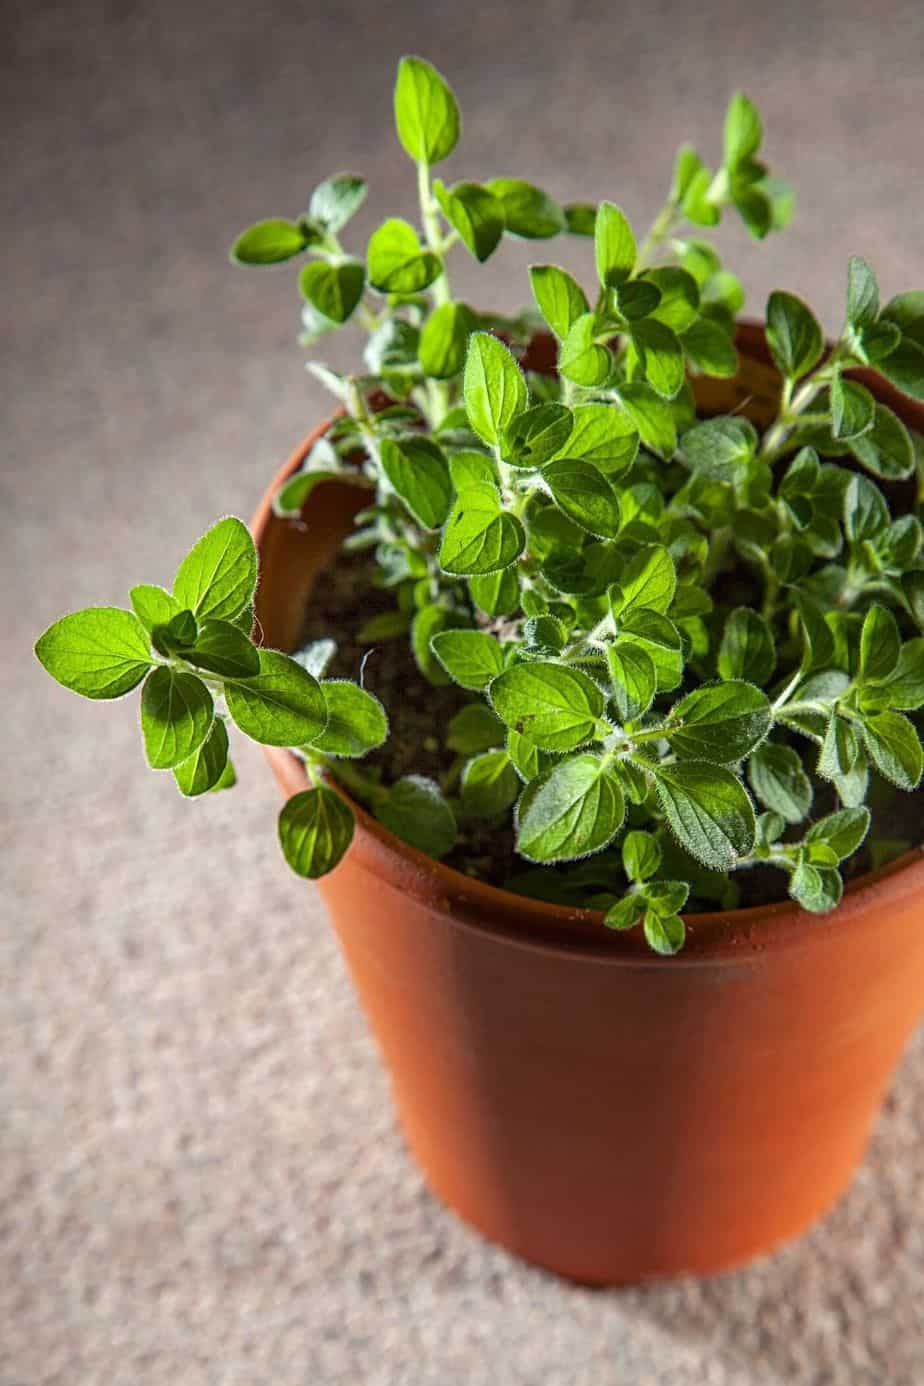 Oregano is a common herb added to food that you can easily grow on your east facing balcony